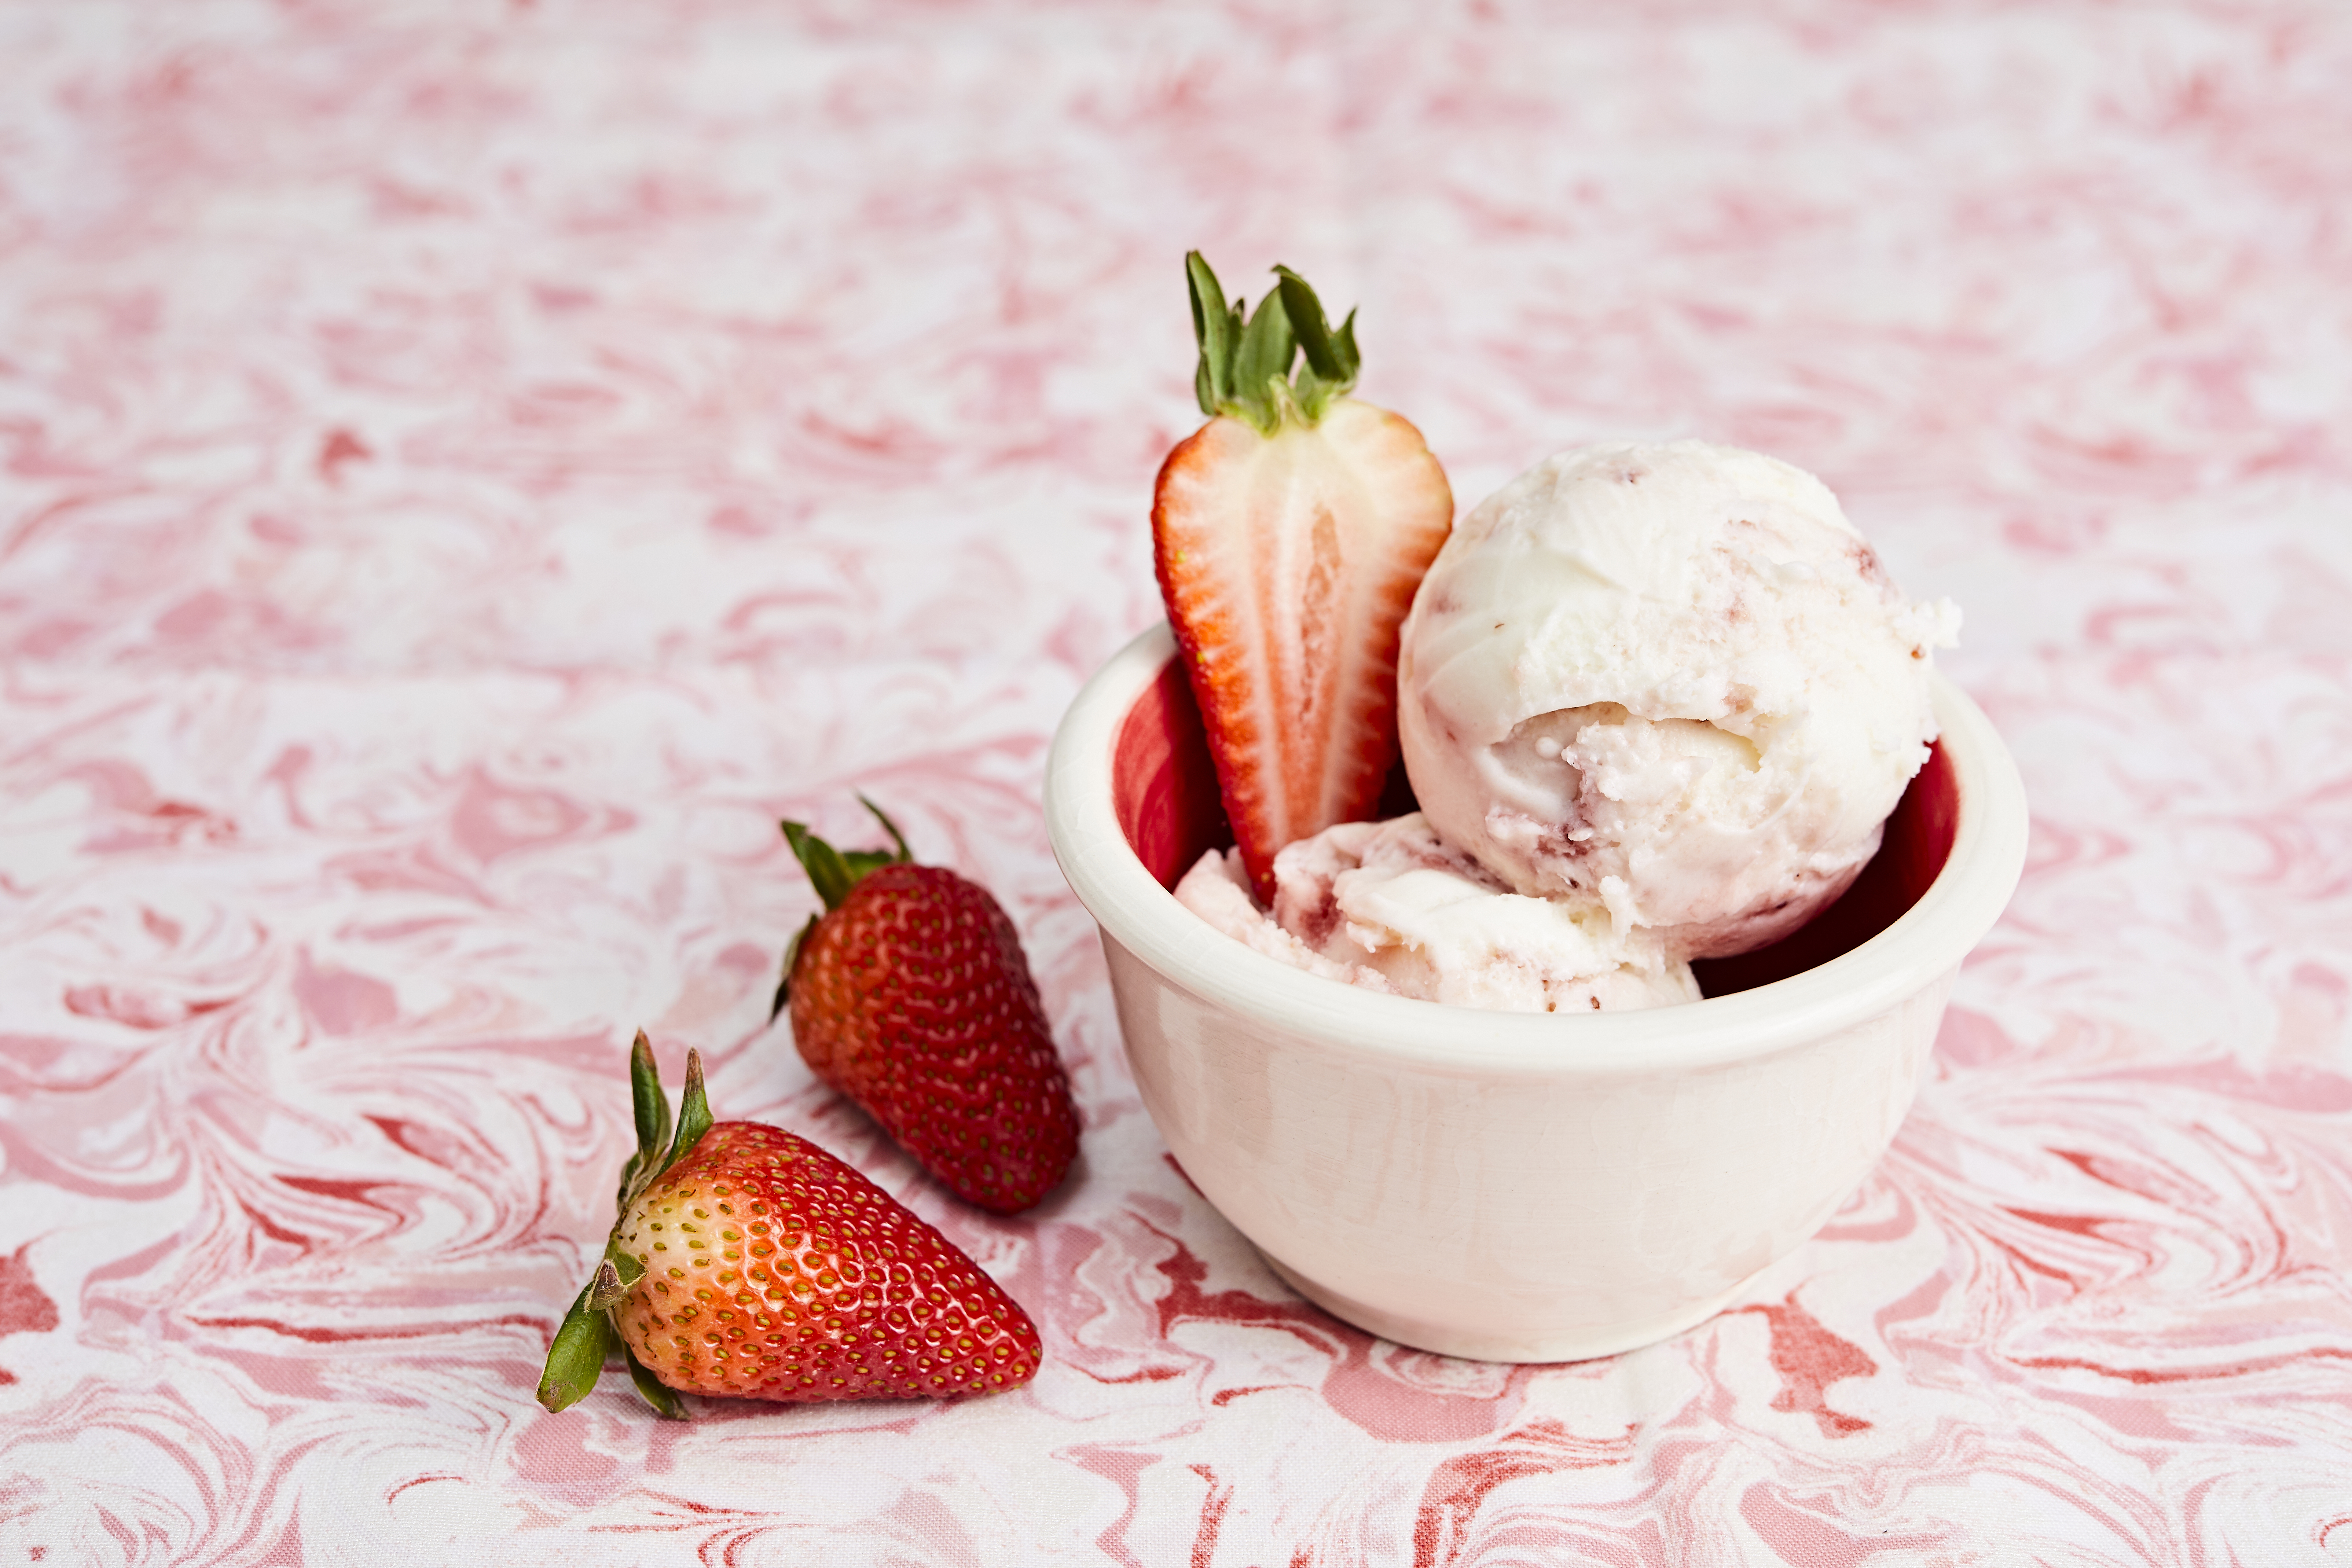 A white bowl of pale-pink ice cream scoops with slices of strawberries.